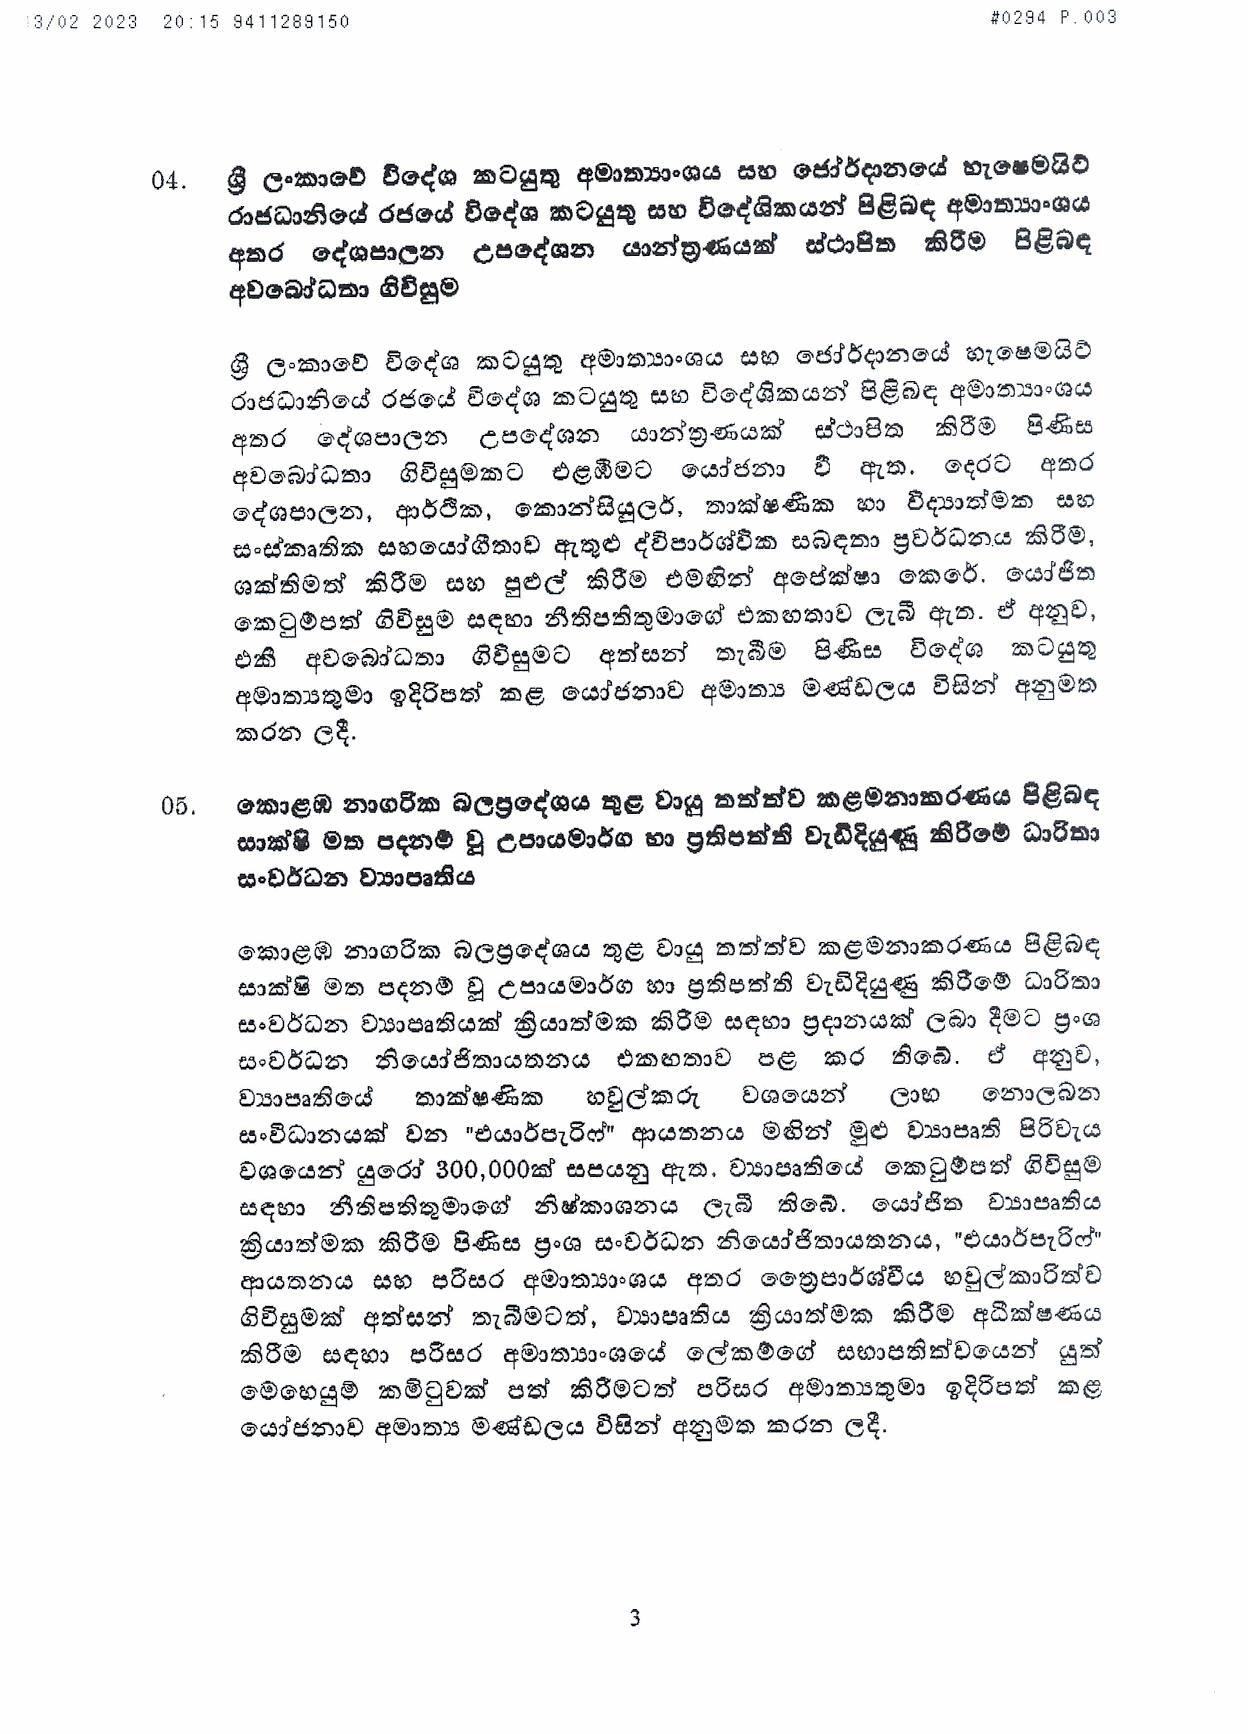 Cabinet Decisiion on 13.02.2023 page 003